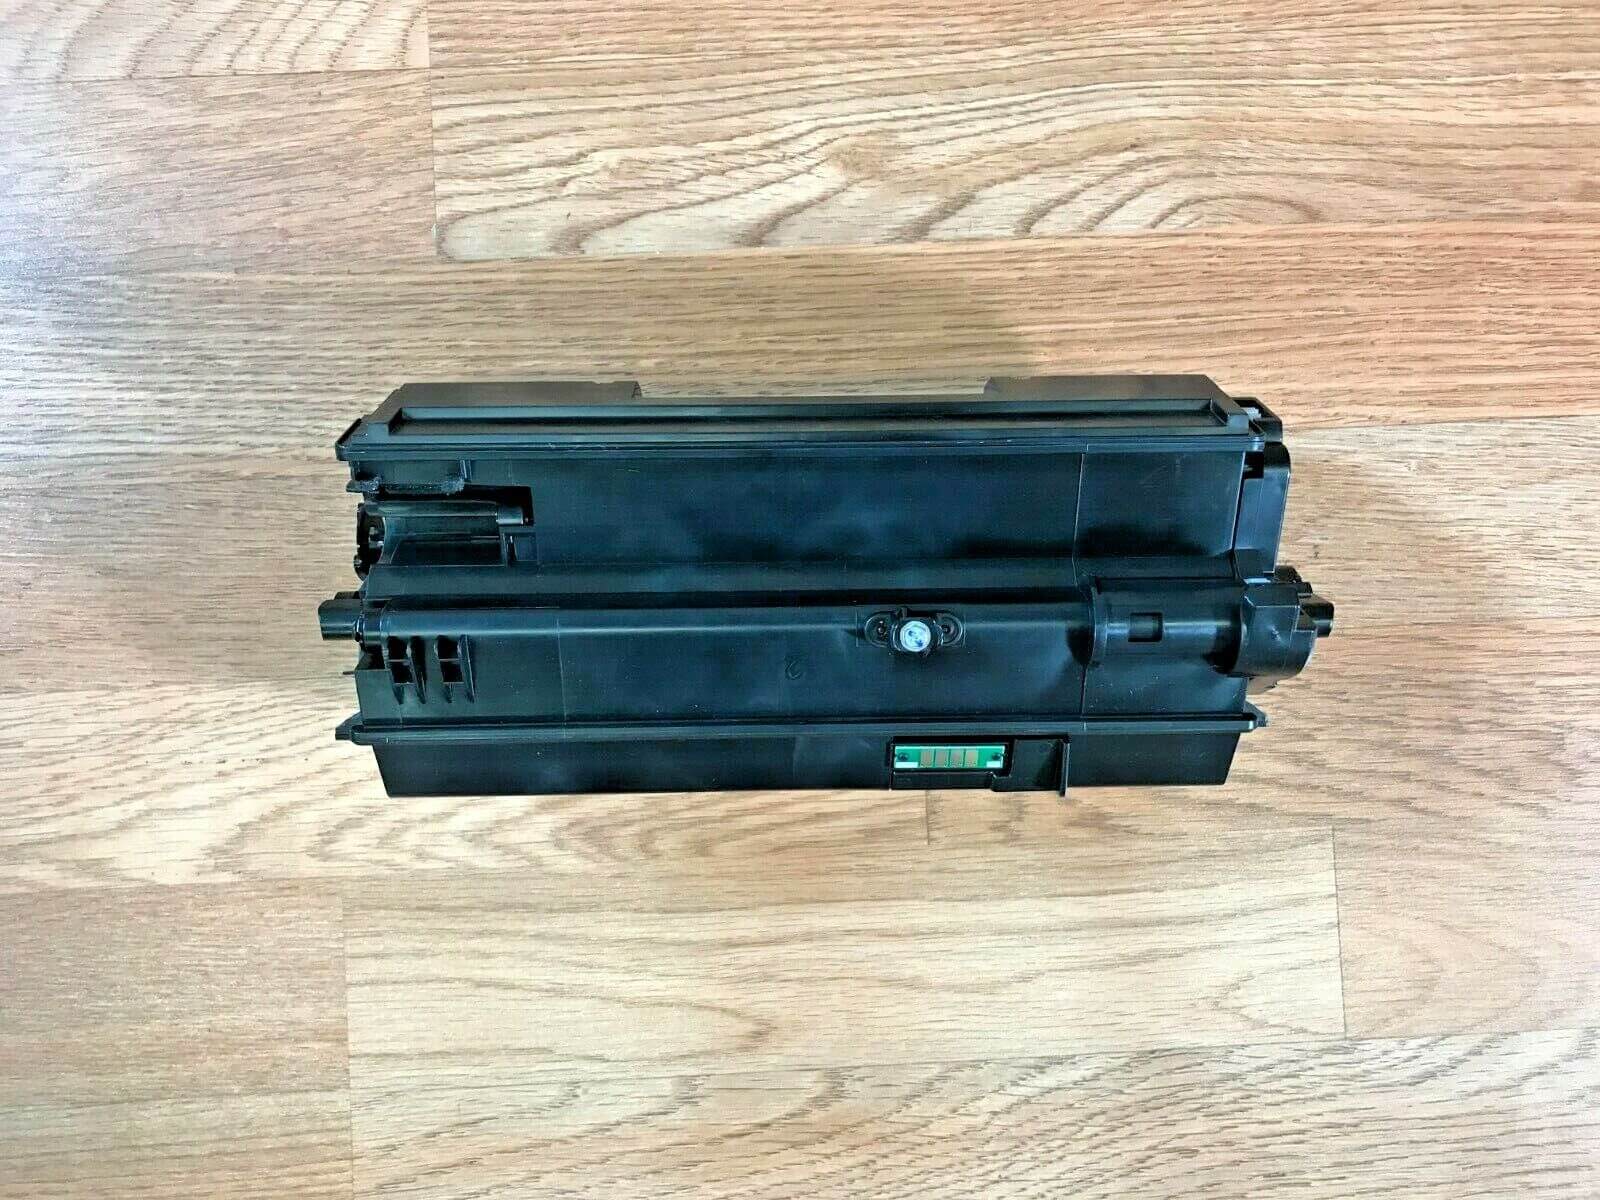 Used Ricoh MP 401 Print Cartridge Black 1.80LBS With Same Day Shipping Available - copier-clearance-center